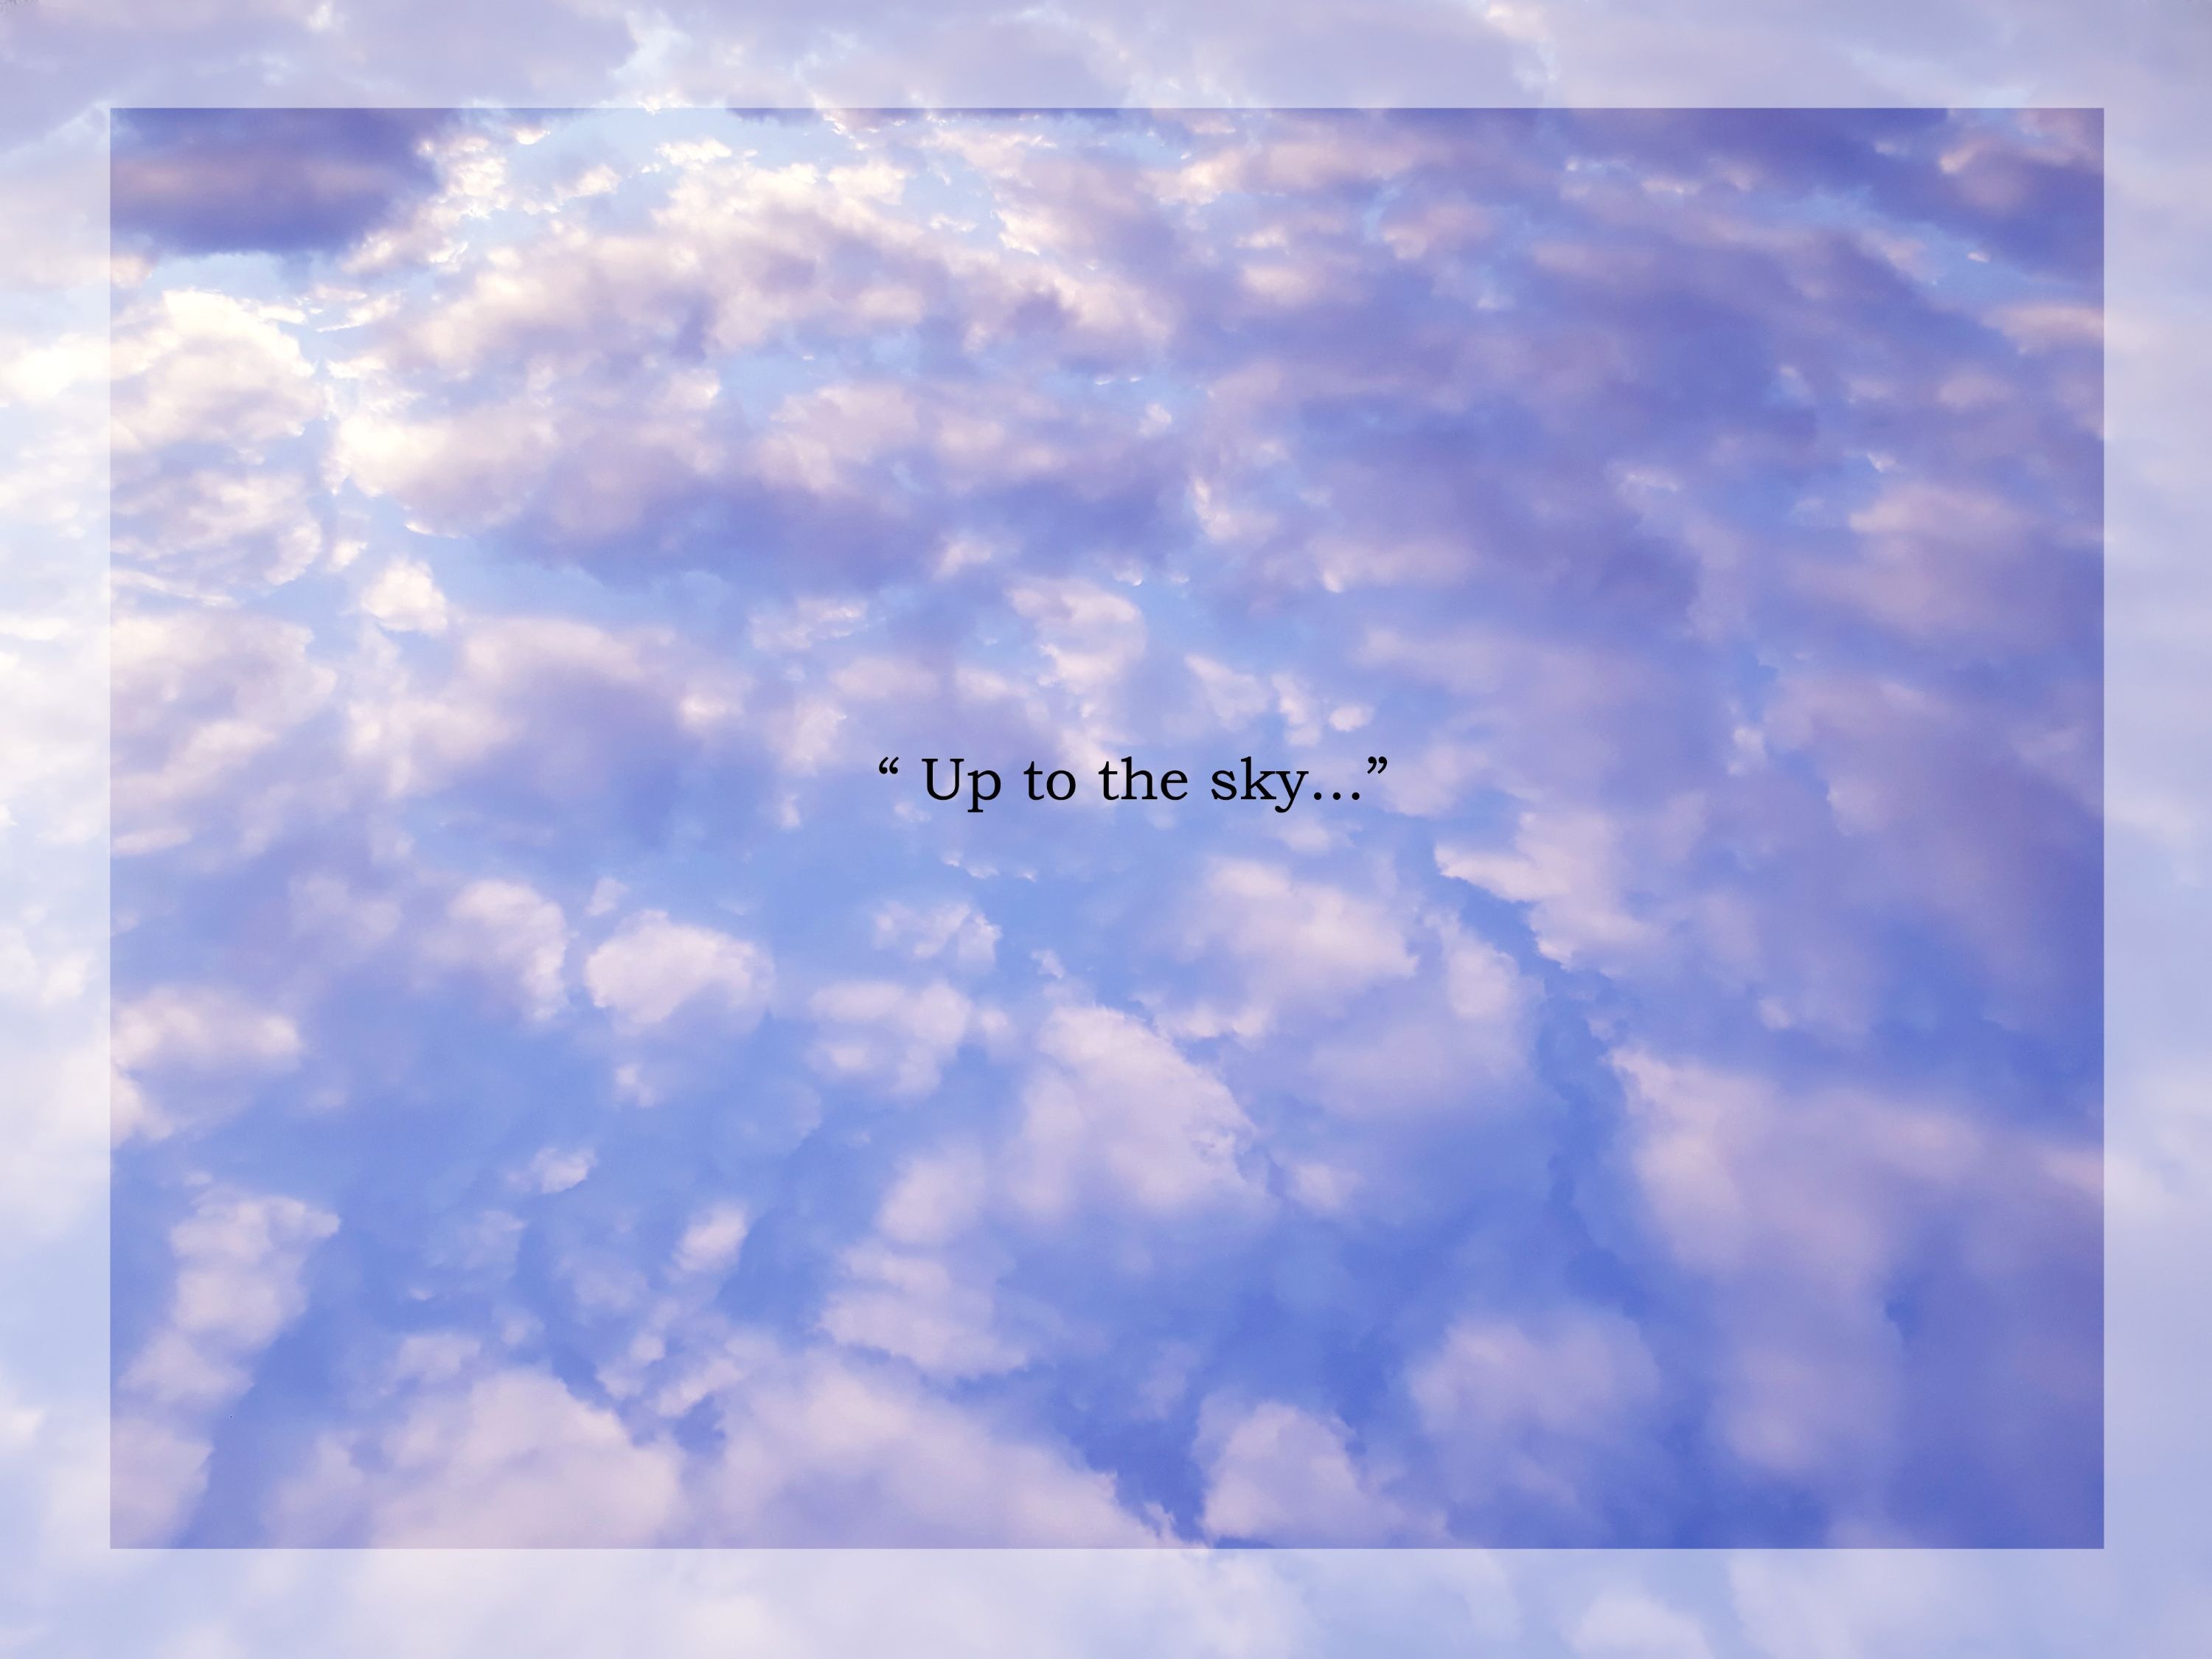 "Up to the sky..."